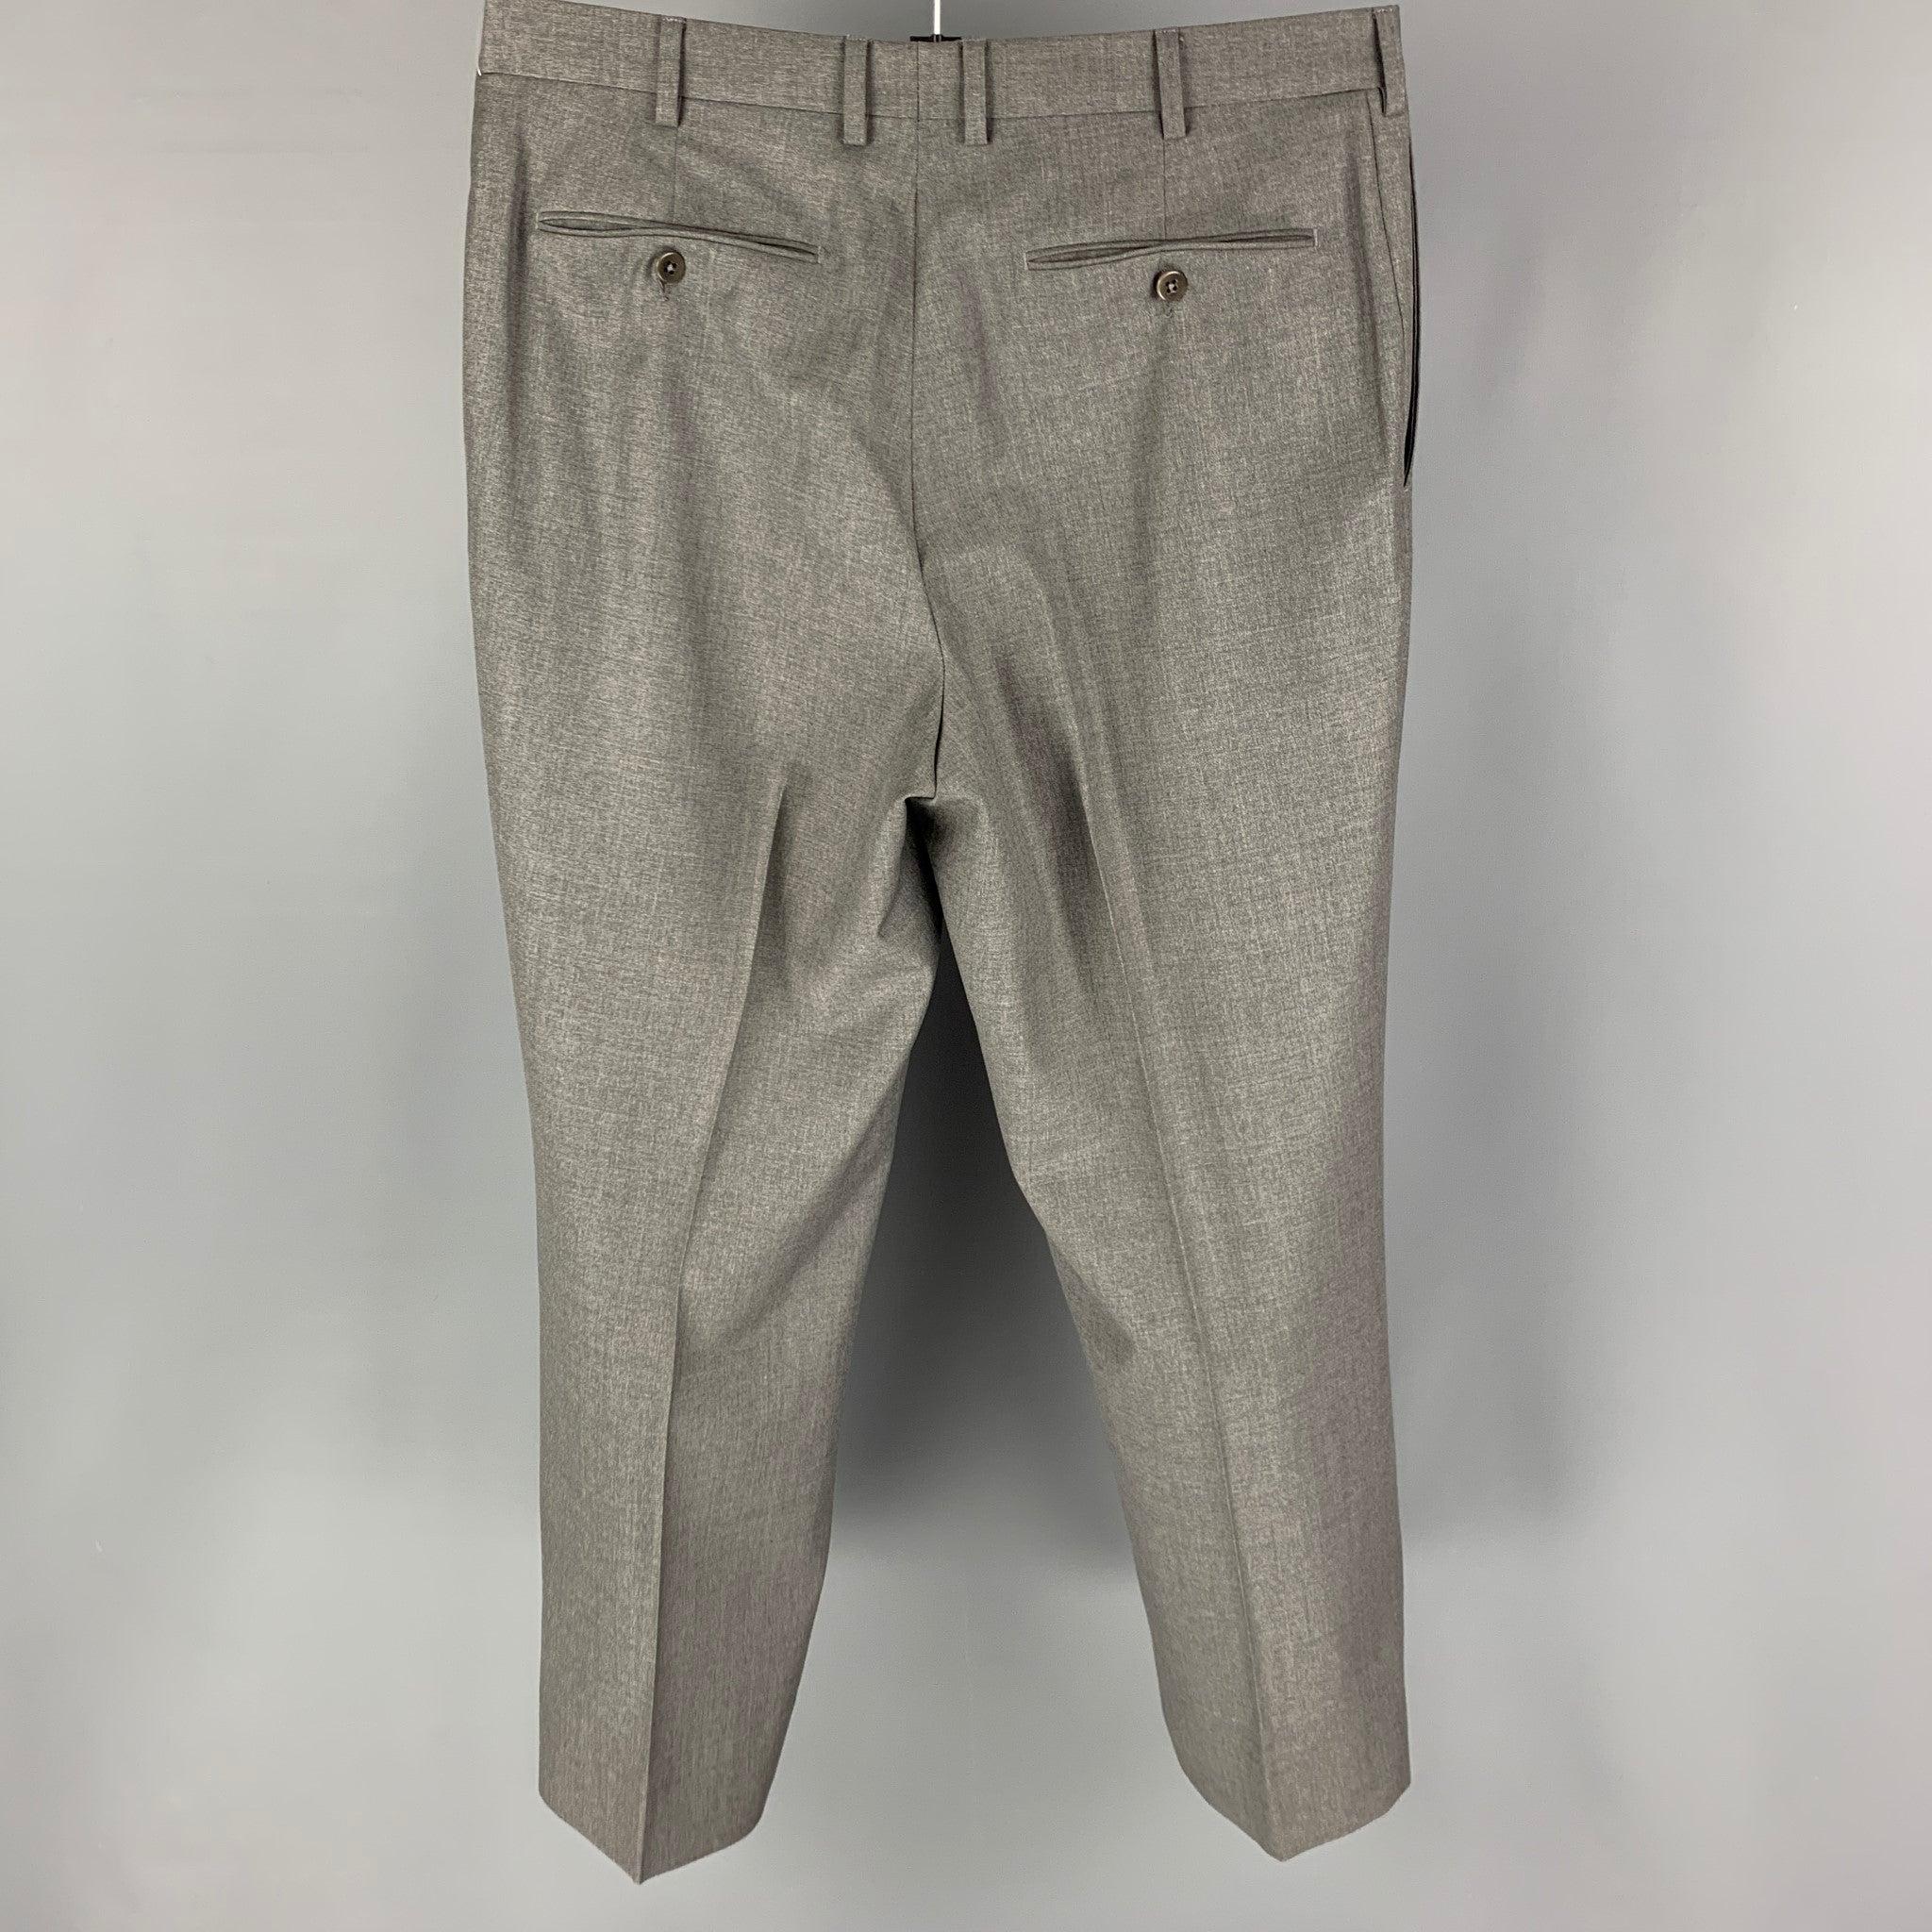 ERMENEGILDO ZEGNA dress pants comes in a grey wool 
featuring a flat front and a zip fly closure.
Very Good
Pre-Owned Condition. 

Marked:  36 R 

Measurements: 
 Waist: 34 inches Rise: 11 inches Inseam: 38 inches Leg Opening: 18 inches 
 
 
